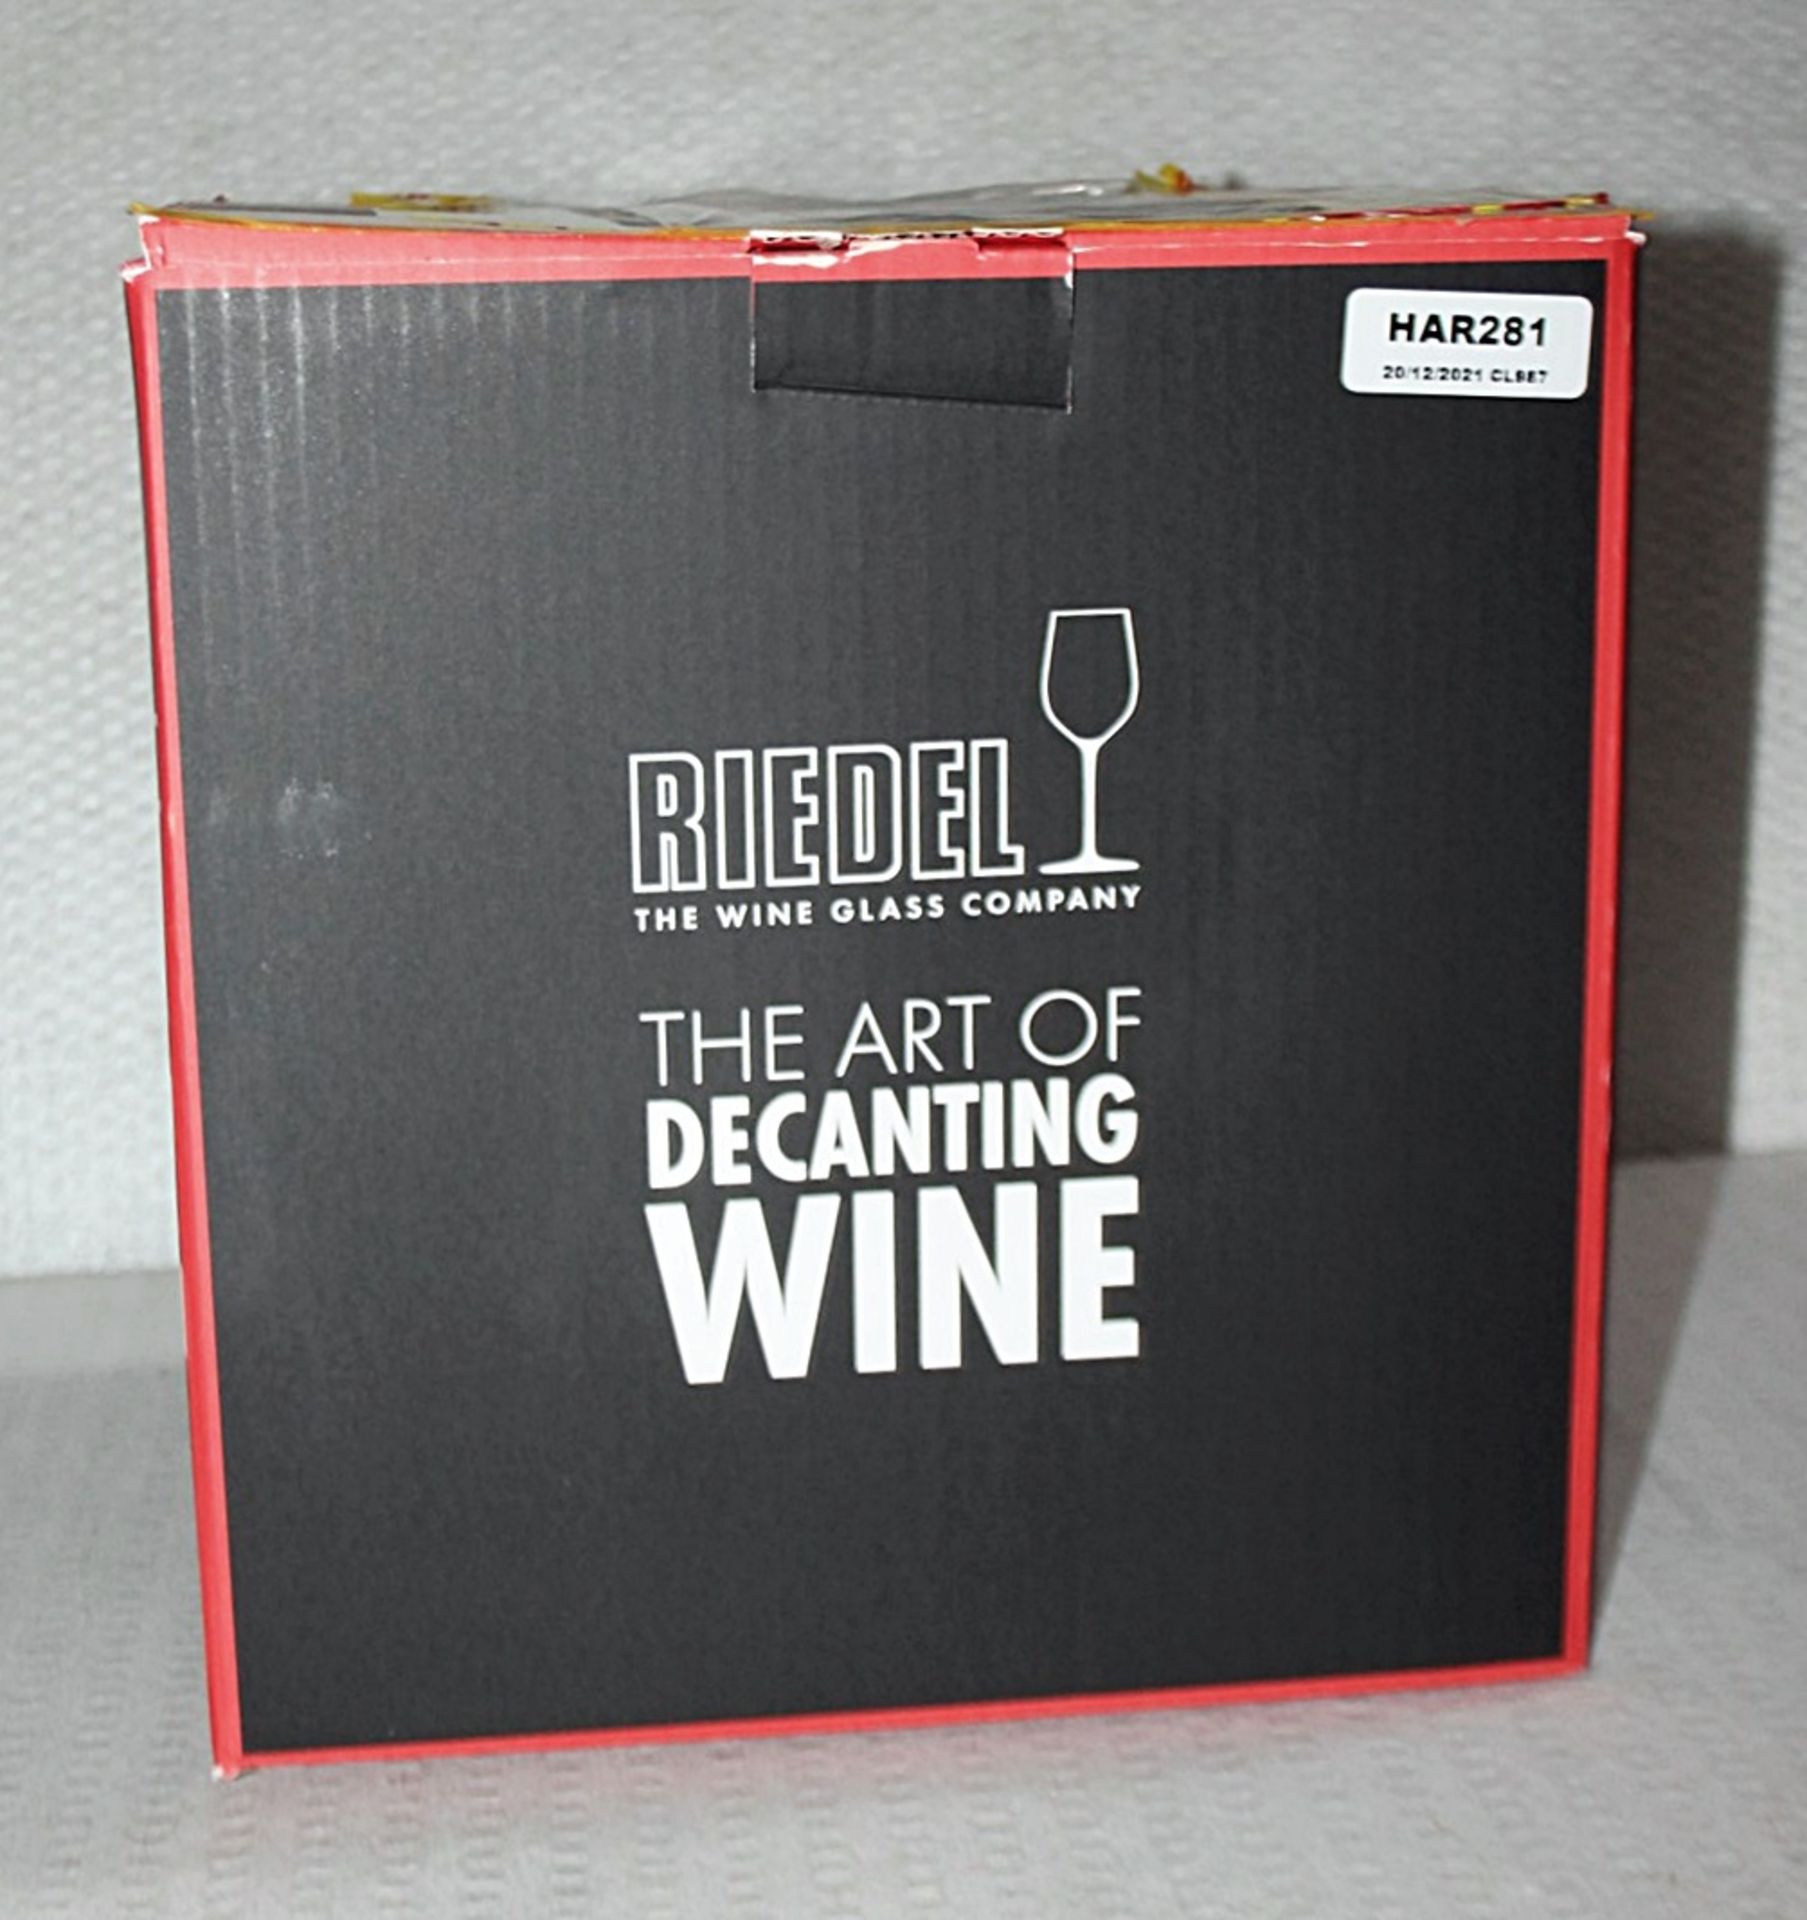 1 x RIEDEL 'Ultra Magnum' Mouth-blown Crystal Glass Carafe Decanter (2L) - Original Price £175.00 - Image 6 of 7